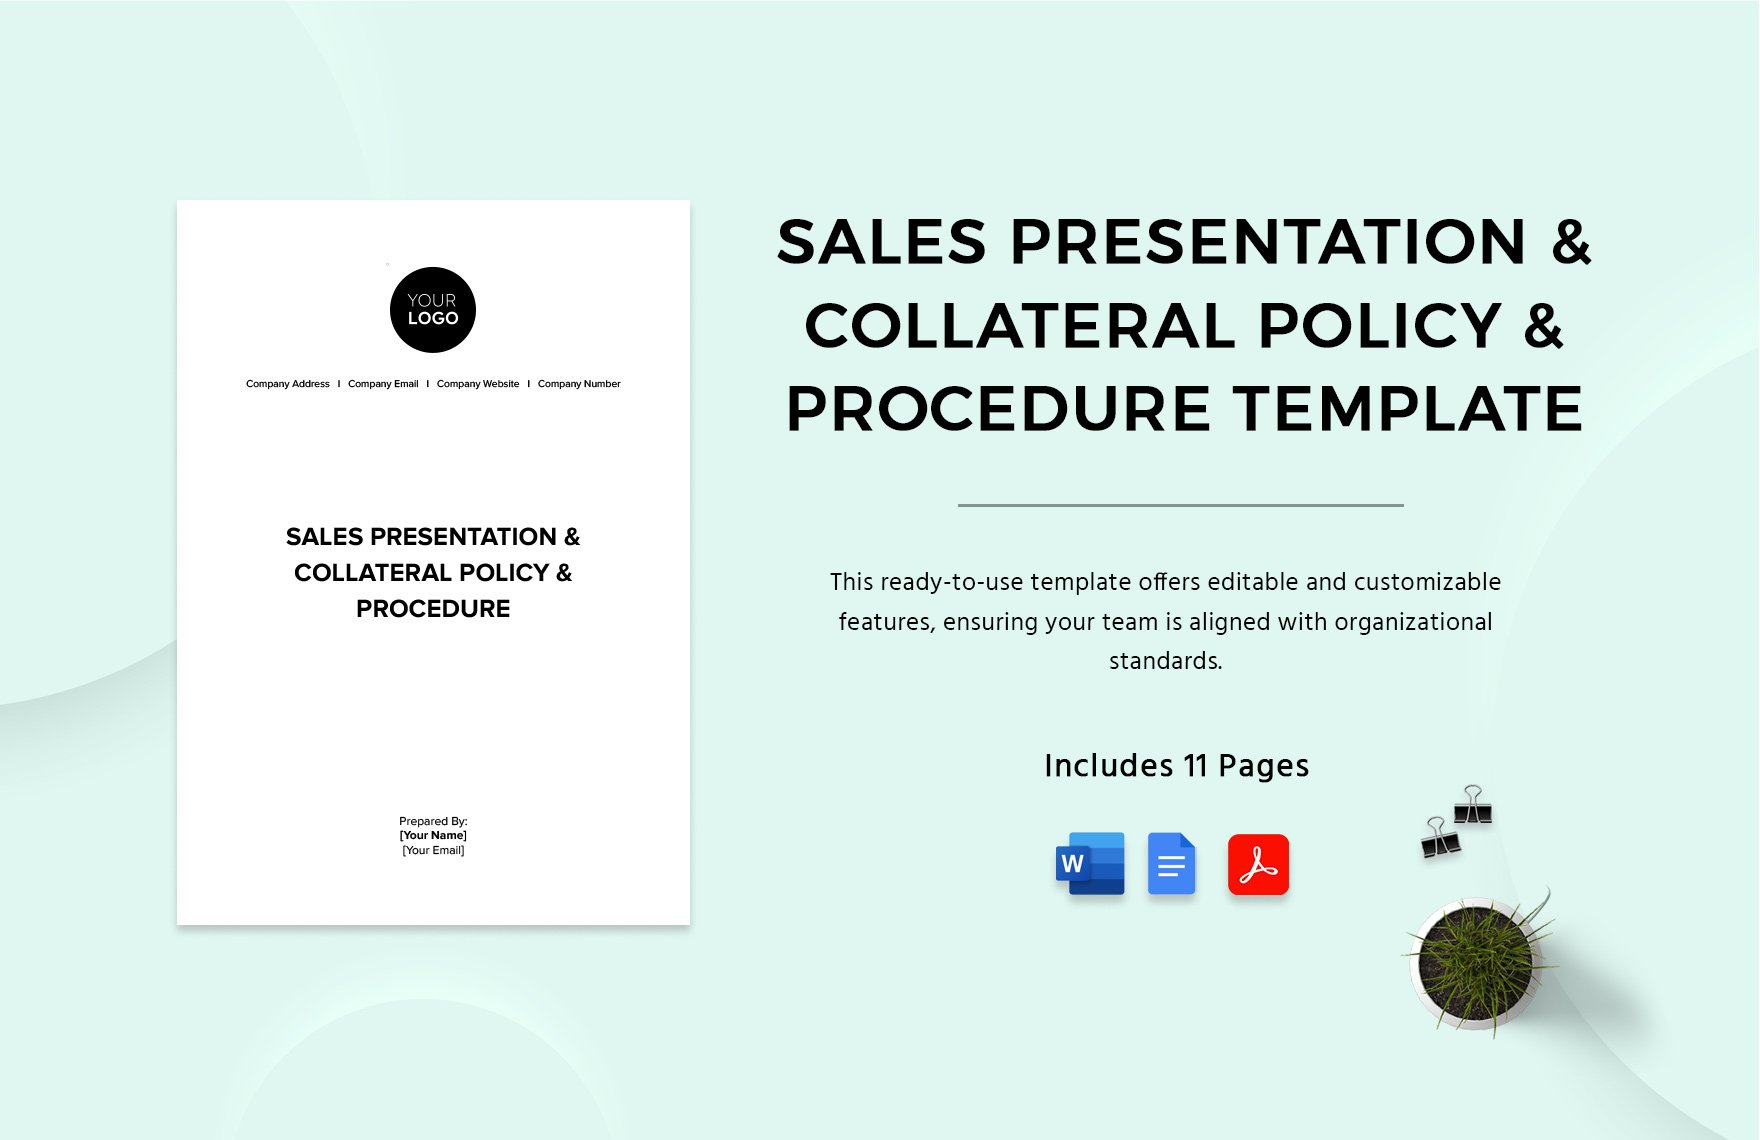 Sales Presentation & Collateral Policy & Procedure Template in Word, Google Docs, PDF